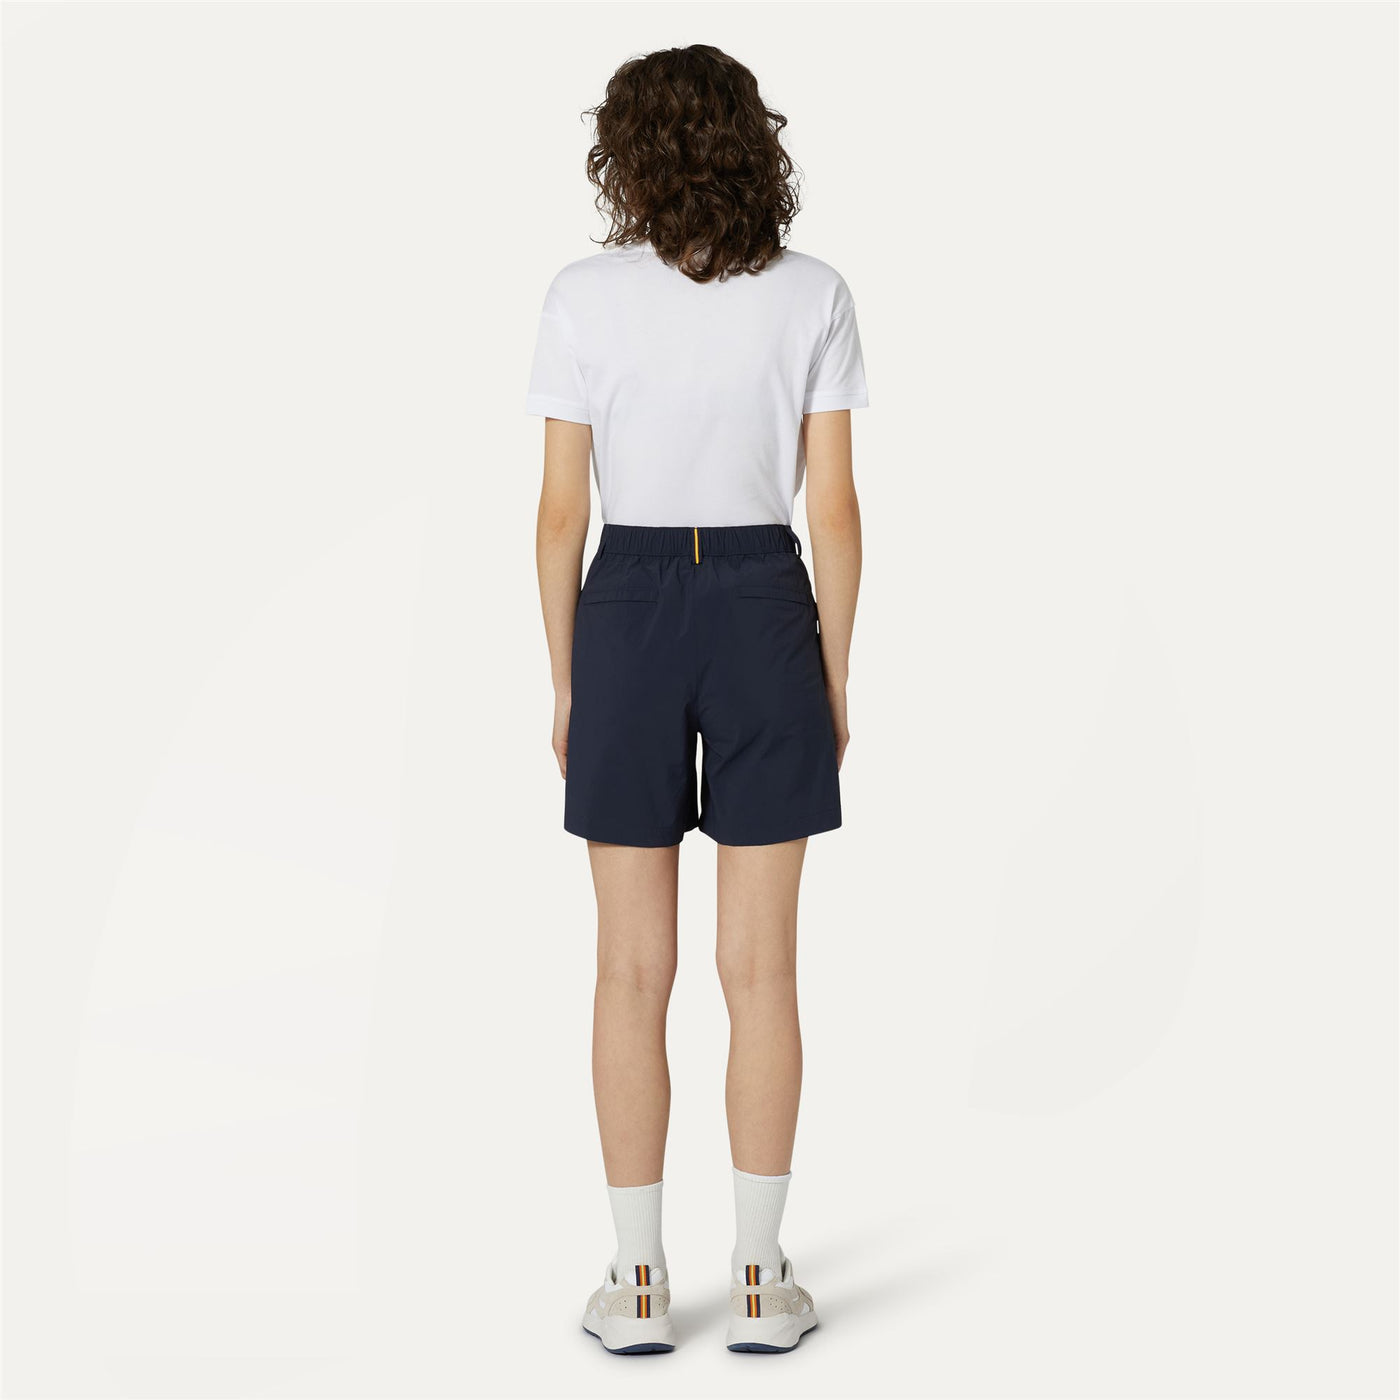 Shorts Woman NOISE CHINO BLUE DEPTH Dressed Front Double		